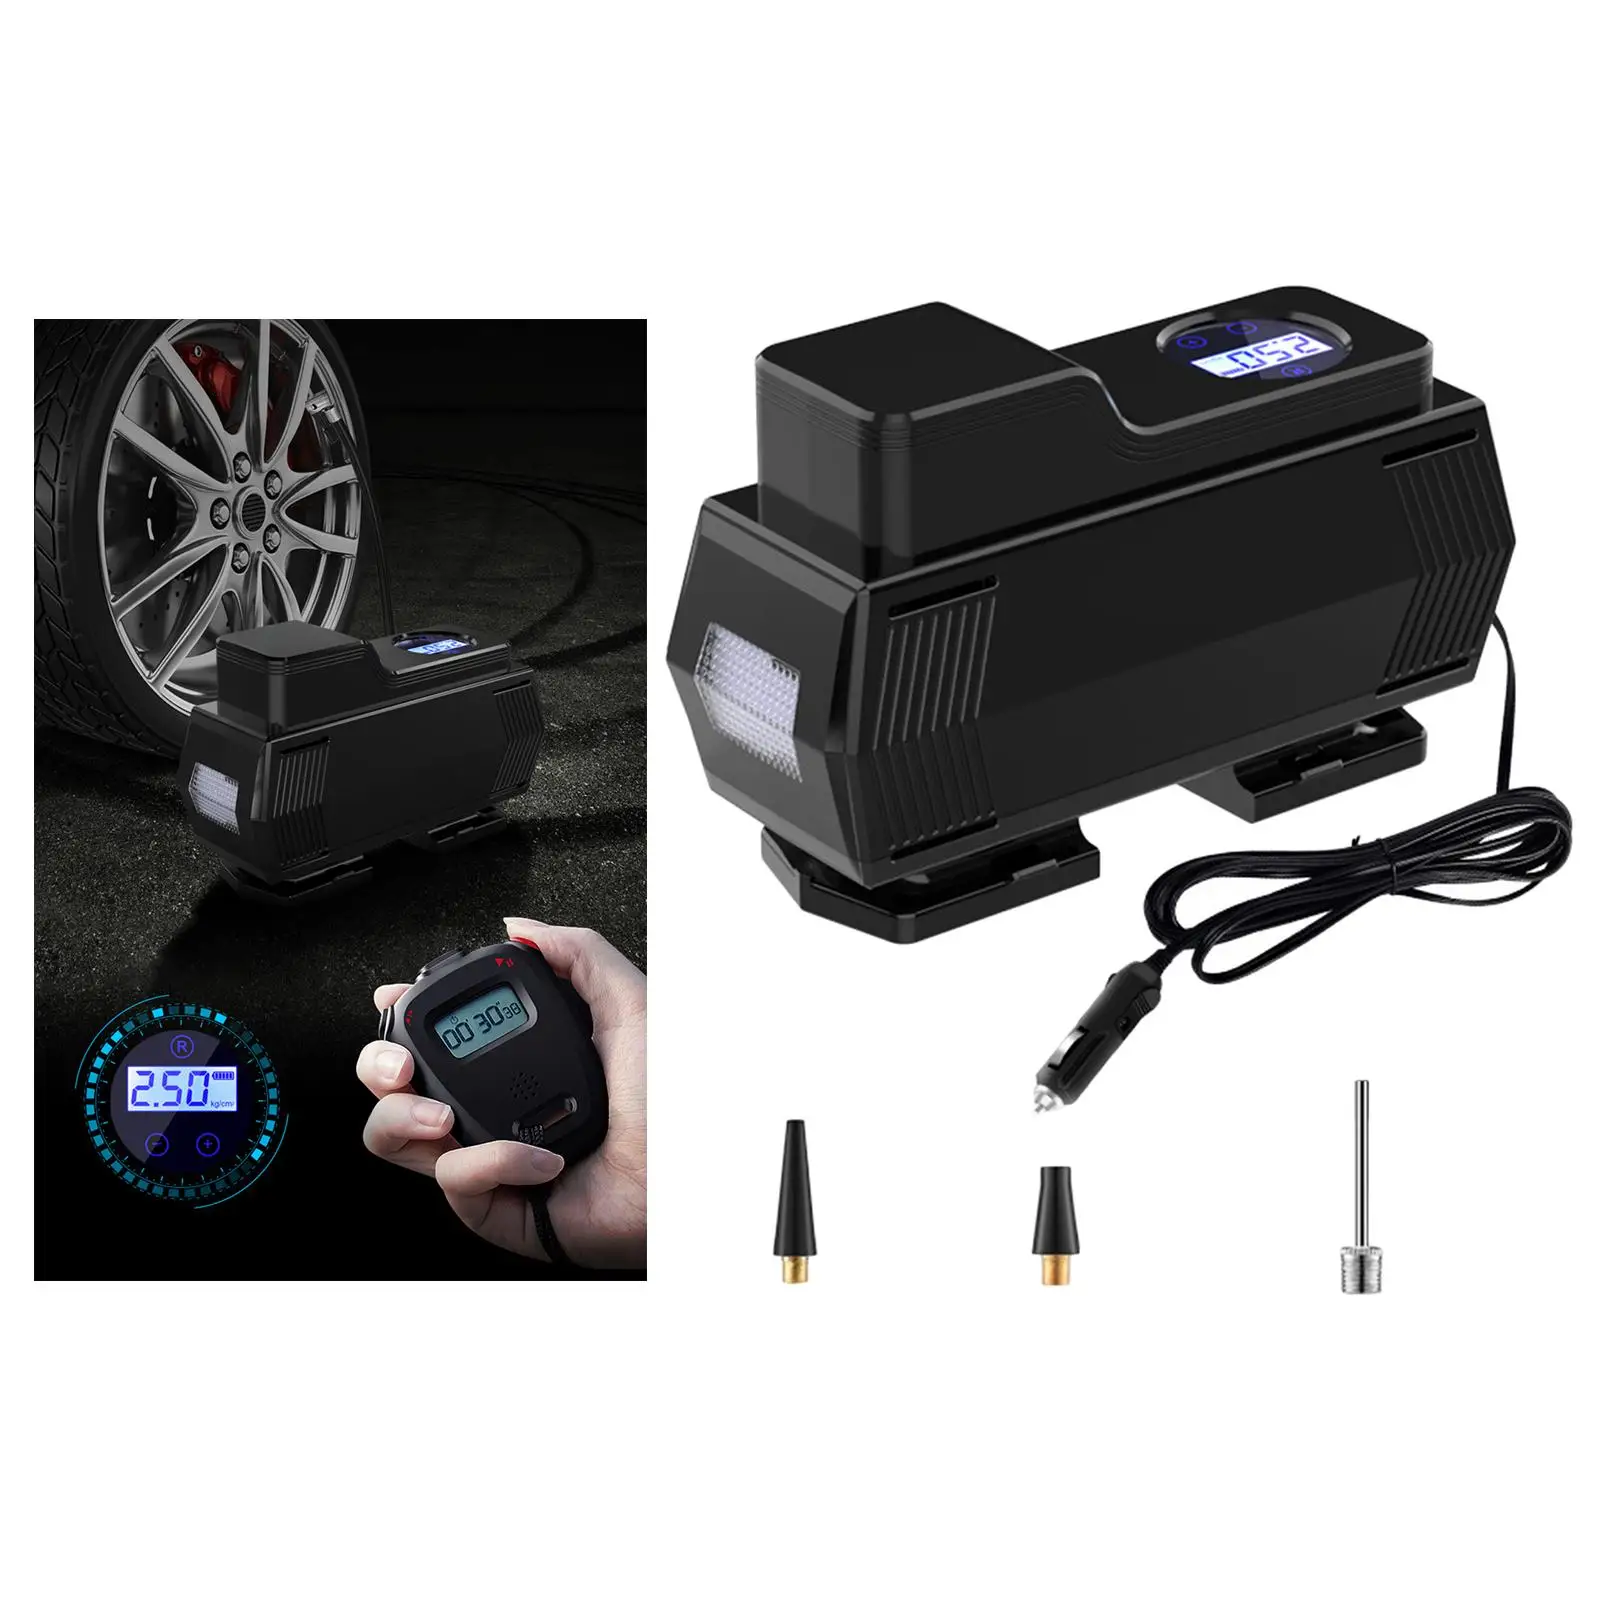 12V Automobile Tire Inflator Pump Air Compressor Pump Vehicle-Mounted Tyre Inflator fors Cars Motorcycles Truck SUV